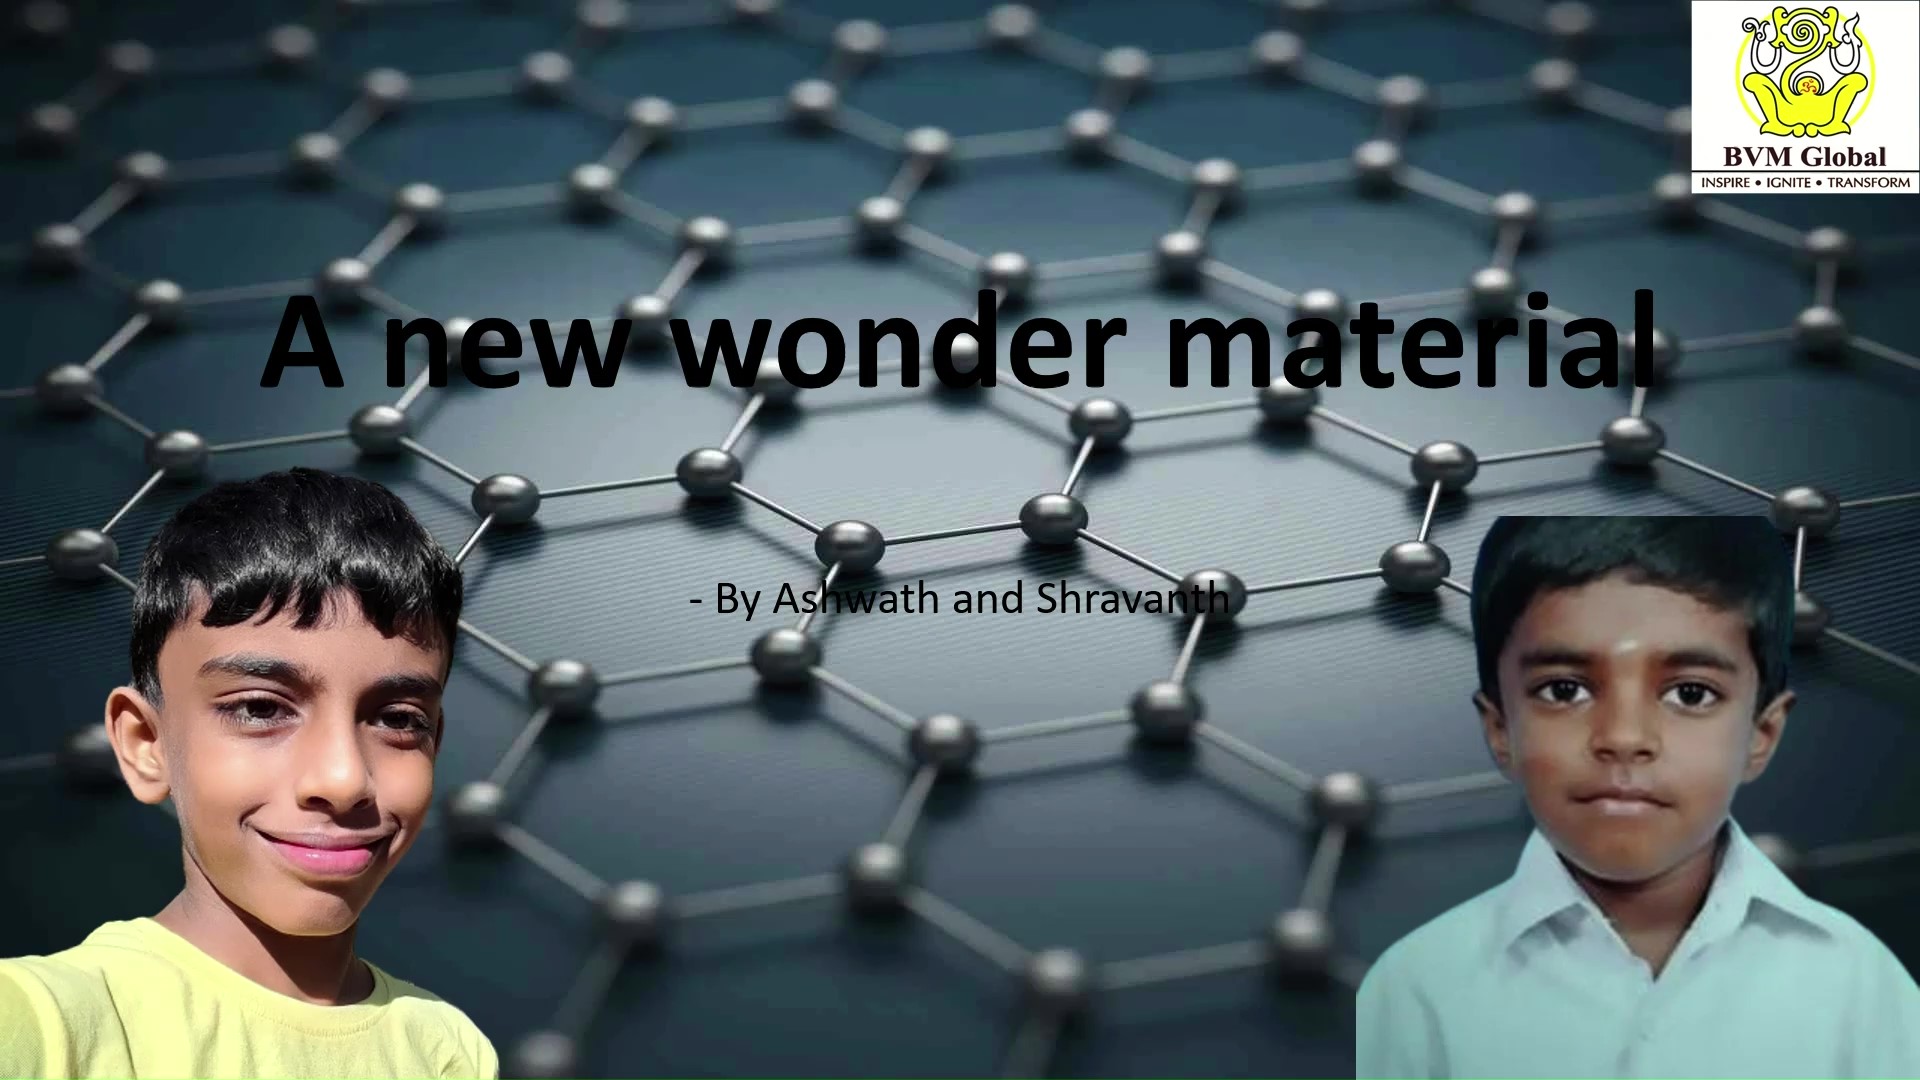 Podcast A New Wonder Material by Ashwath and Shravanth